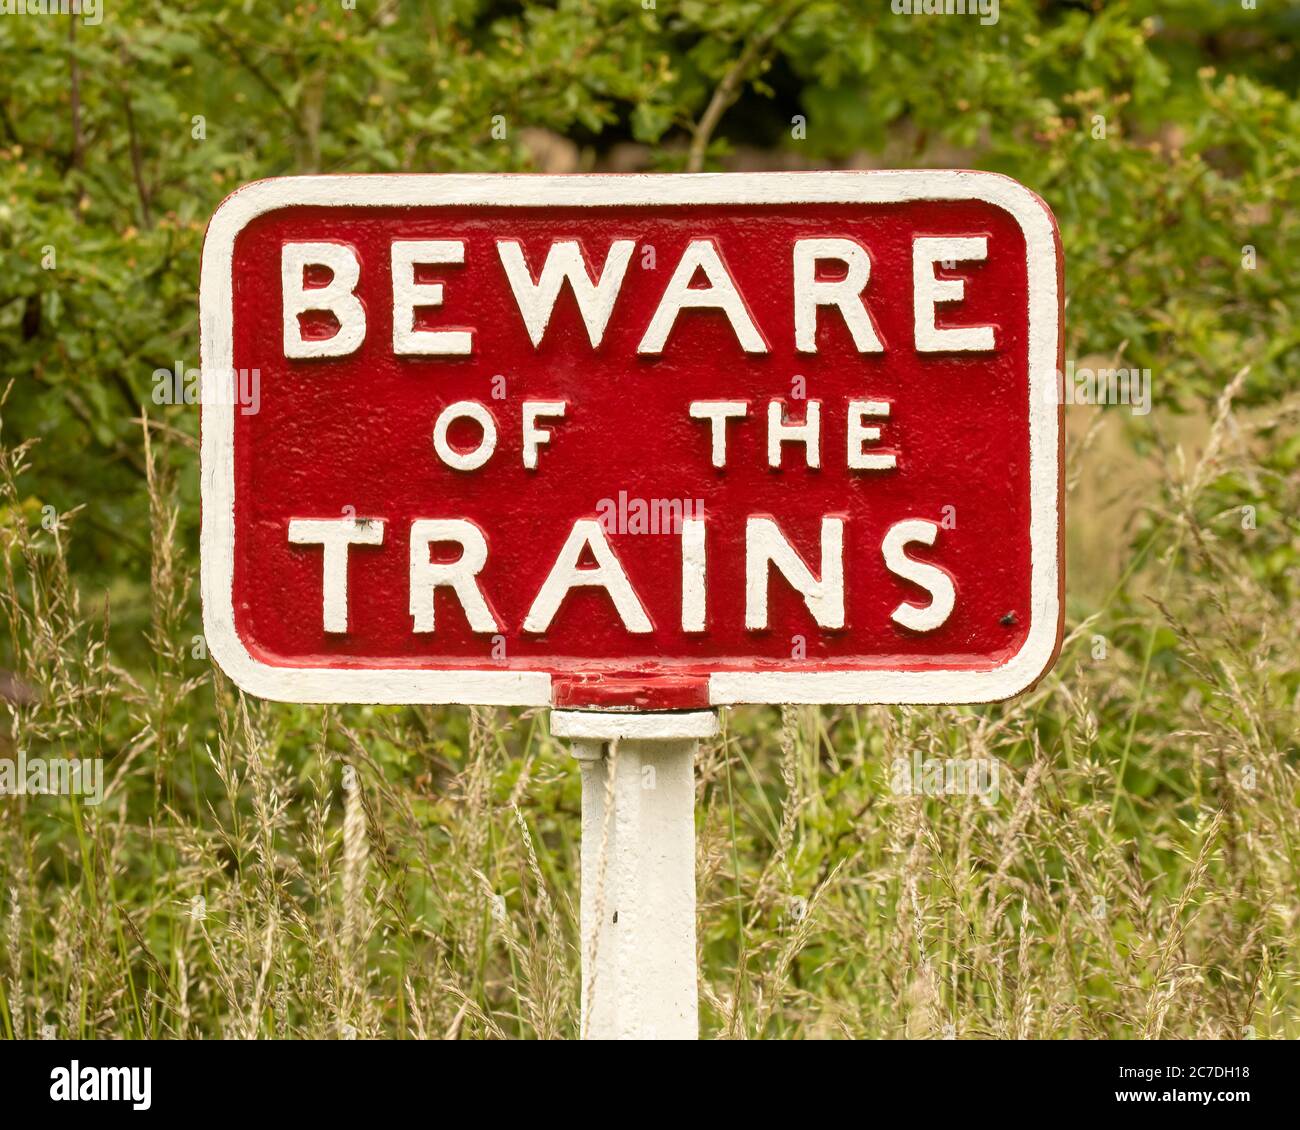 Beware of the Trains sign, cast iron - red with white lettering, against a grassy background Stock Photo